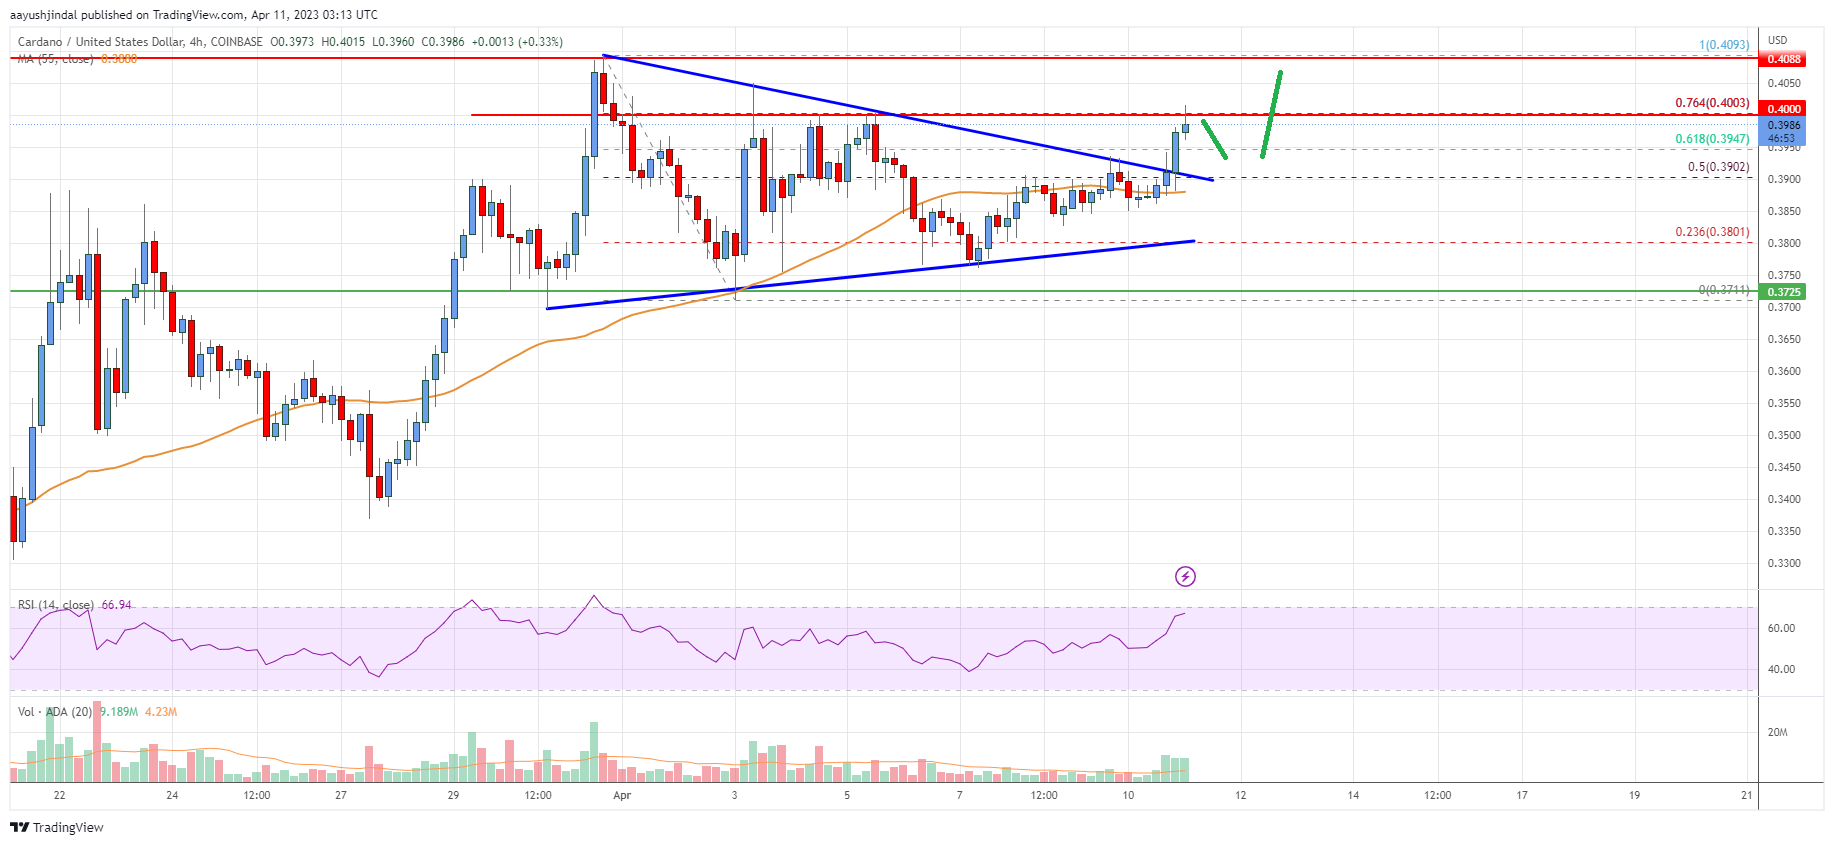 Cardano (ADA) Price Analysis: Rally Could Gain Pace Above $0.42